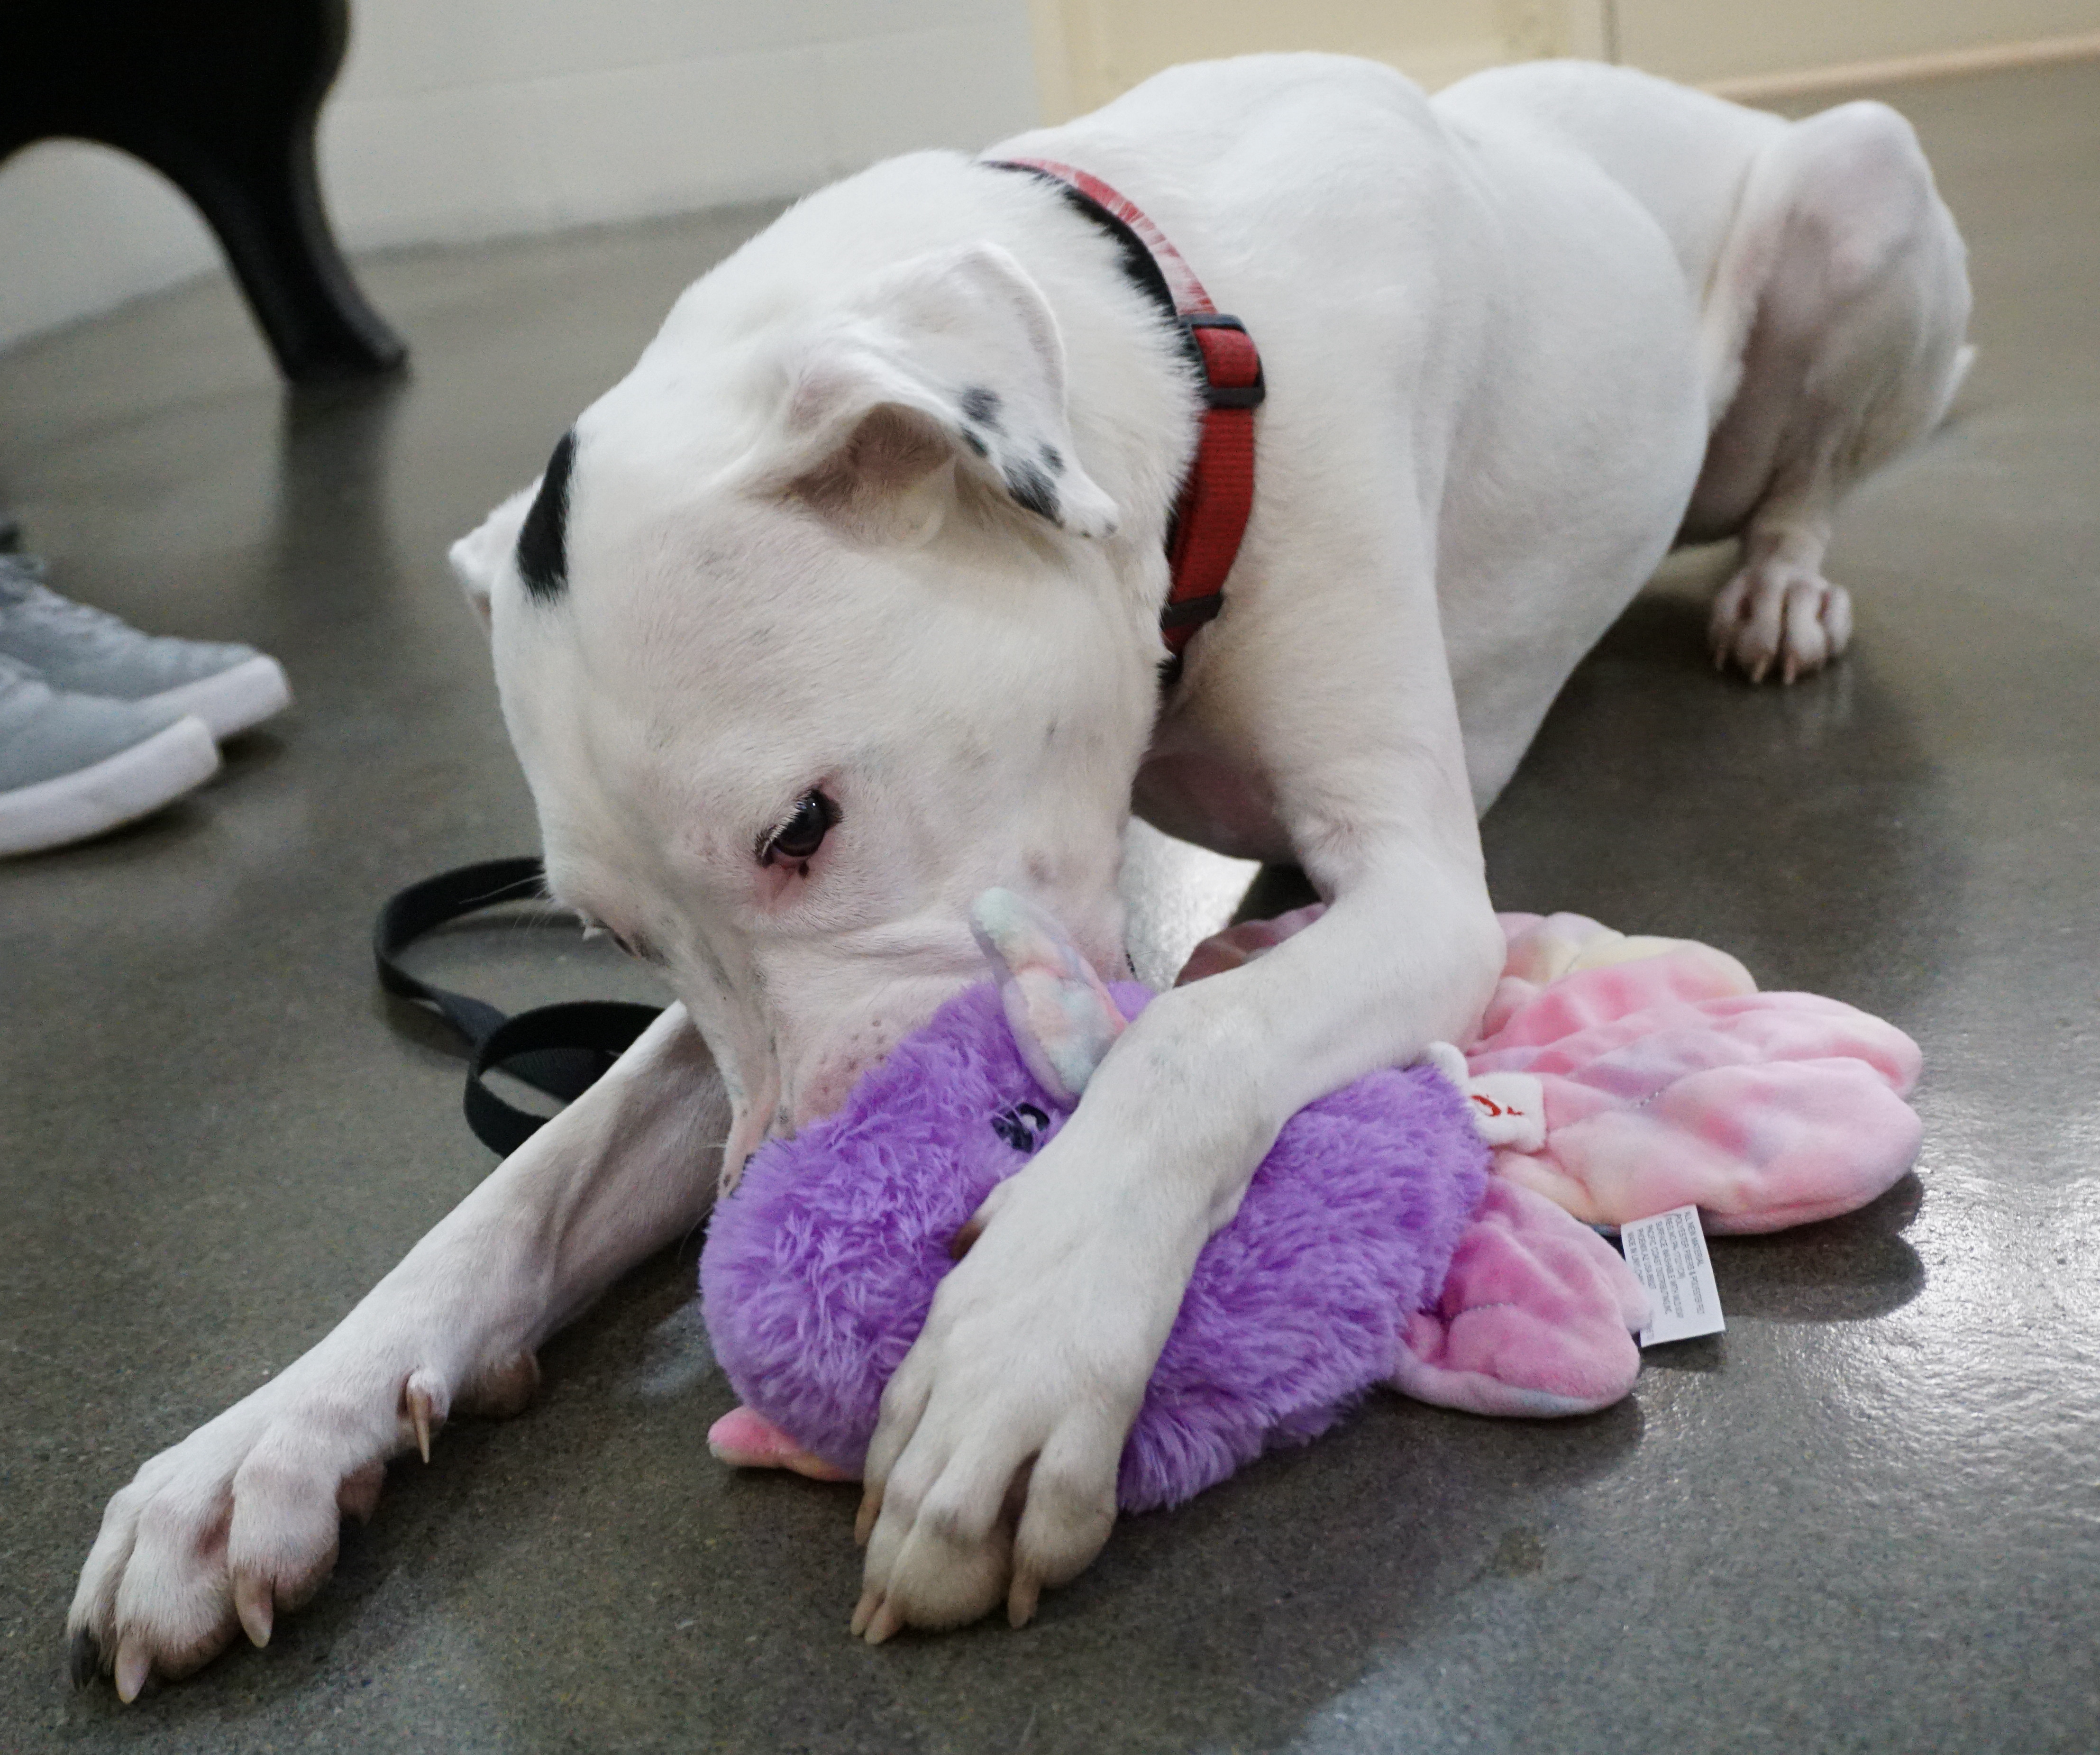 A white dog plays with a purple and pink fluffy toy.